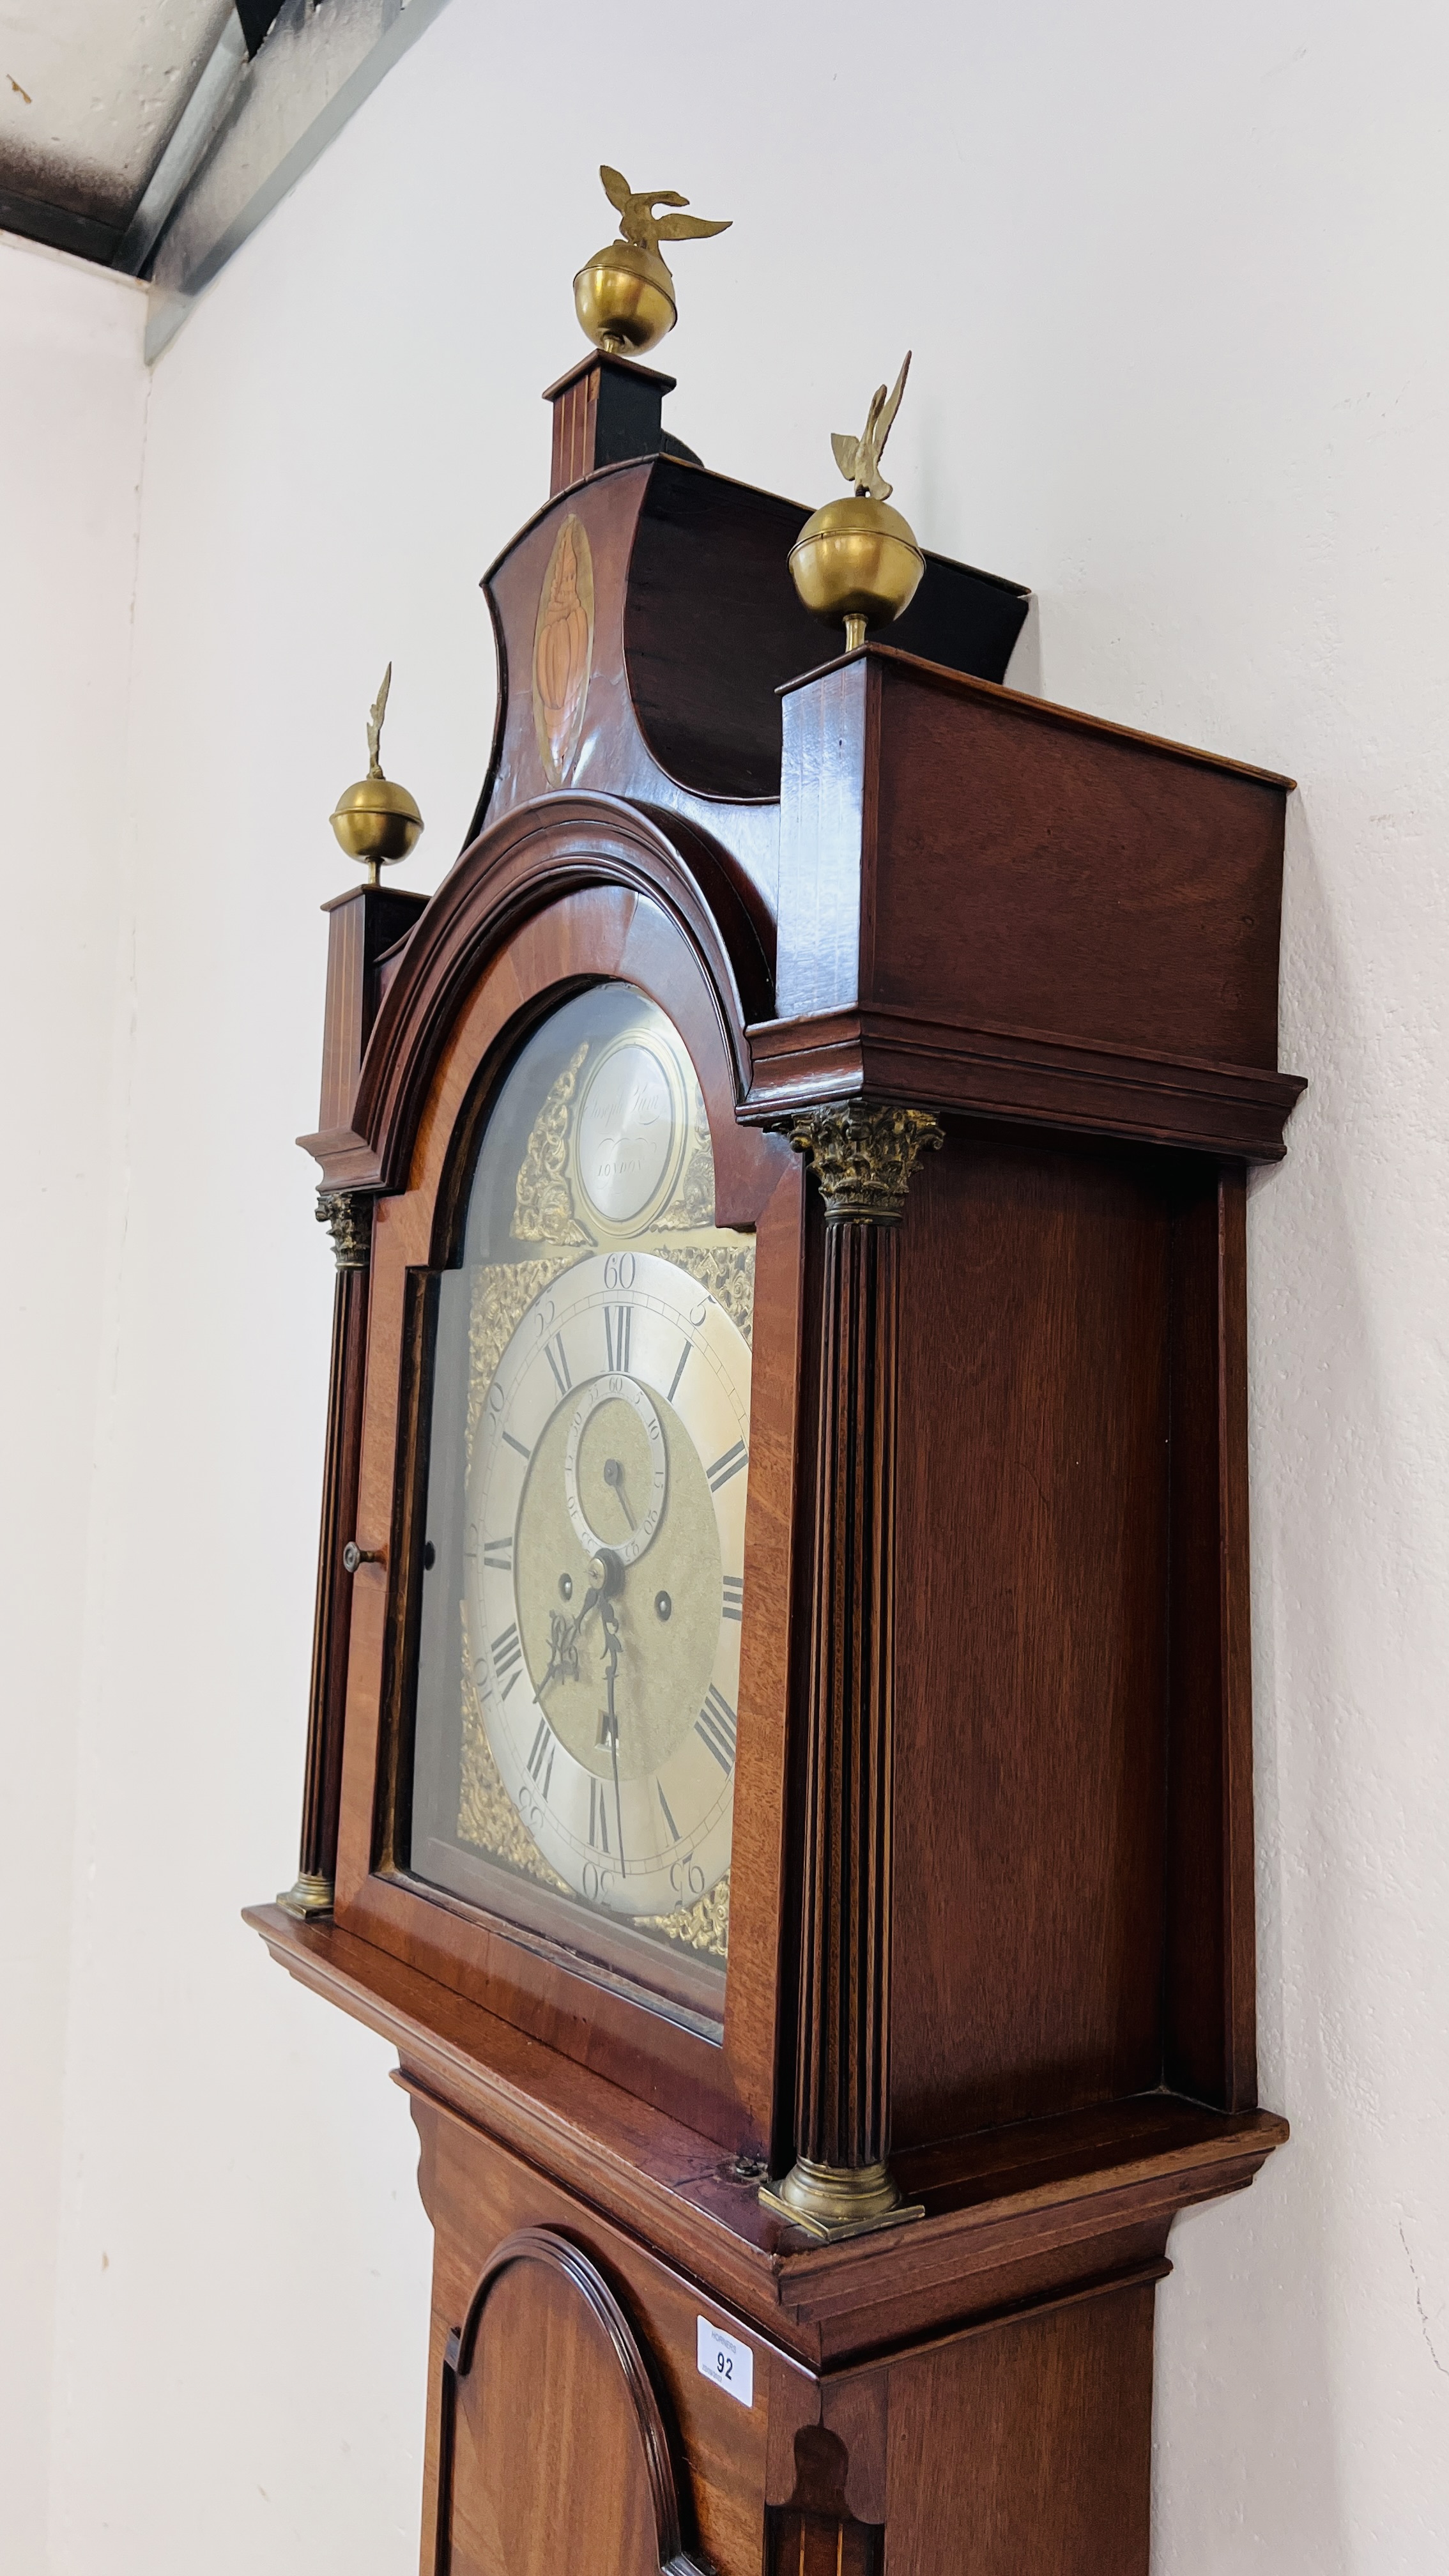 AN INLAID MAHOGANY GRANDFATHER CLOCK WITH JOSEPH LUM FACE COMPLETE WITH KEY AND PENDULUM - Image 7 of 14